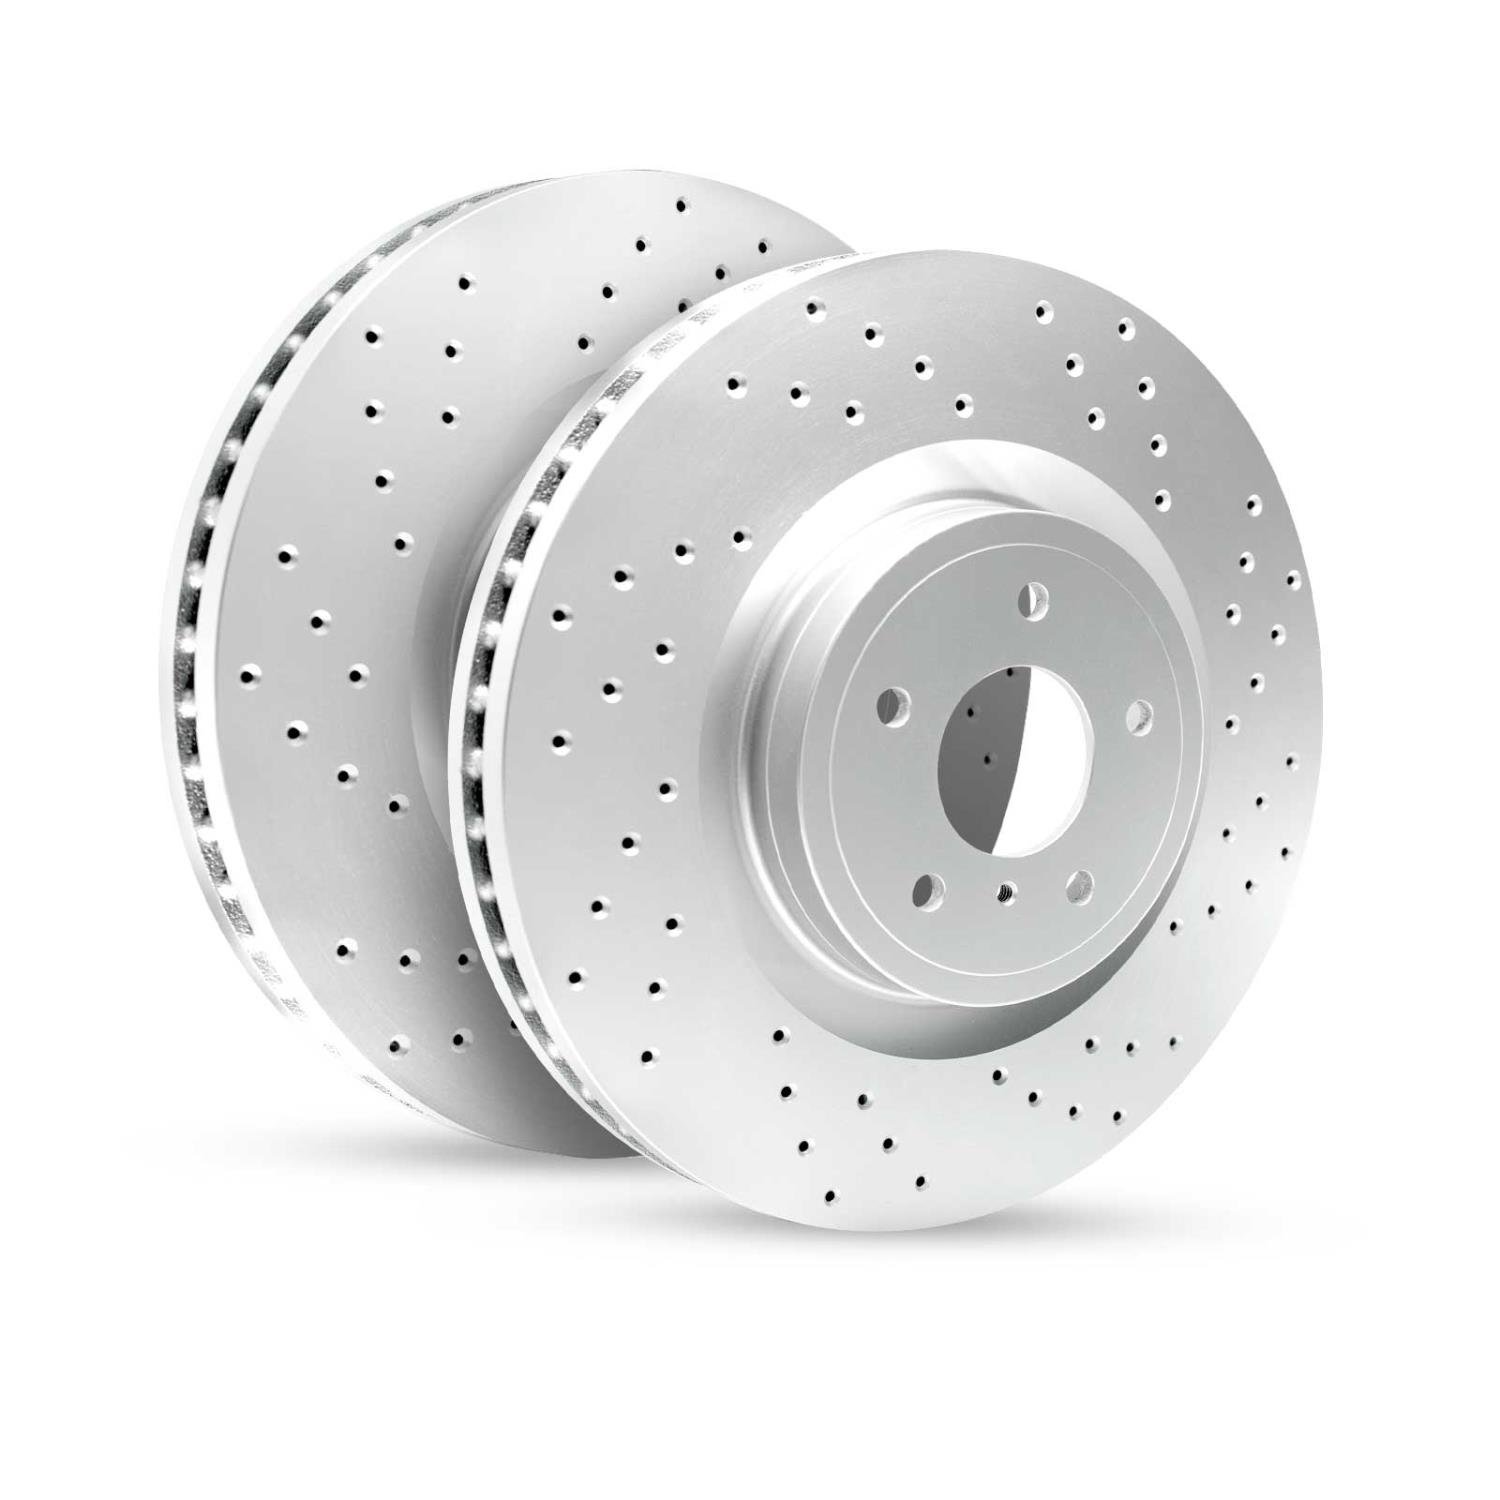 GEO-Carbon Drilled/Slotted Rotors, 1999-2006 BMW, Position: Rear